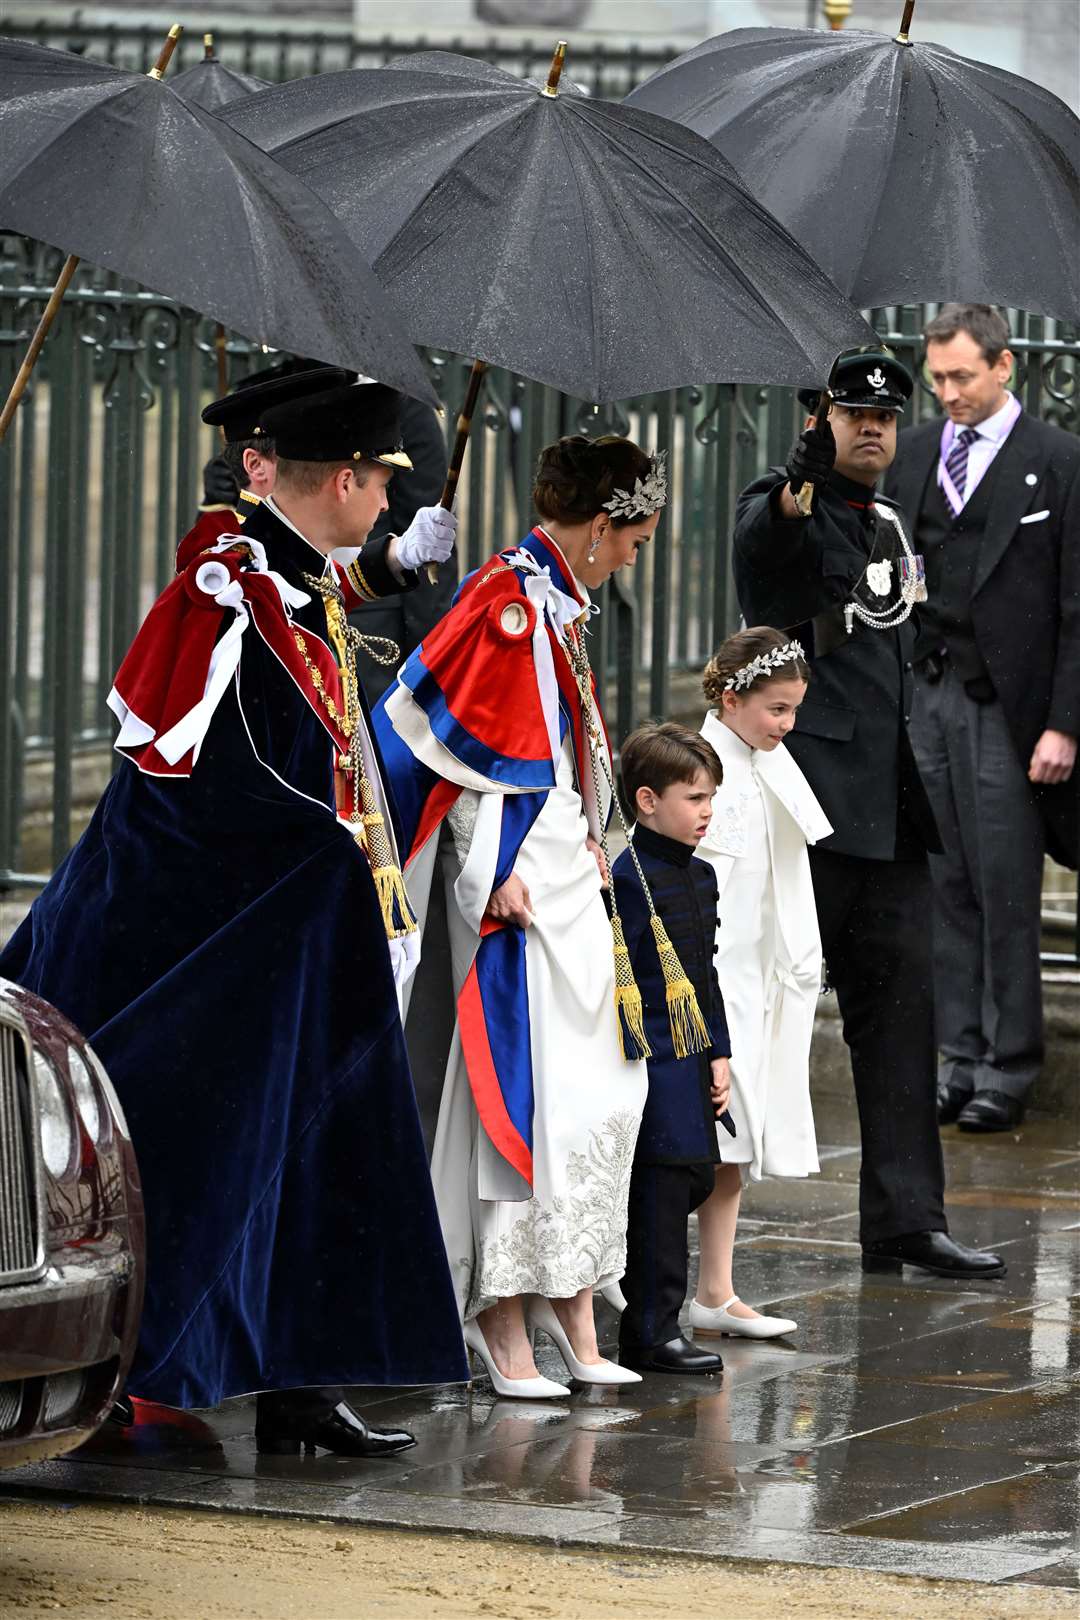 The family arrived in the rain outside Westminster Abbey (Toby Melville/PA)